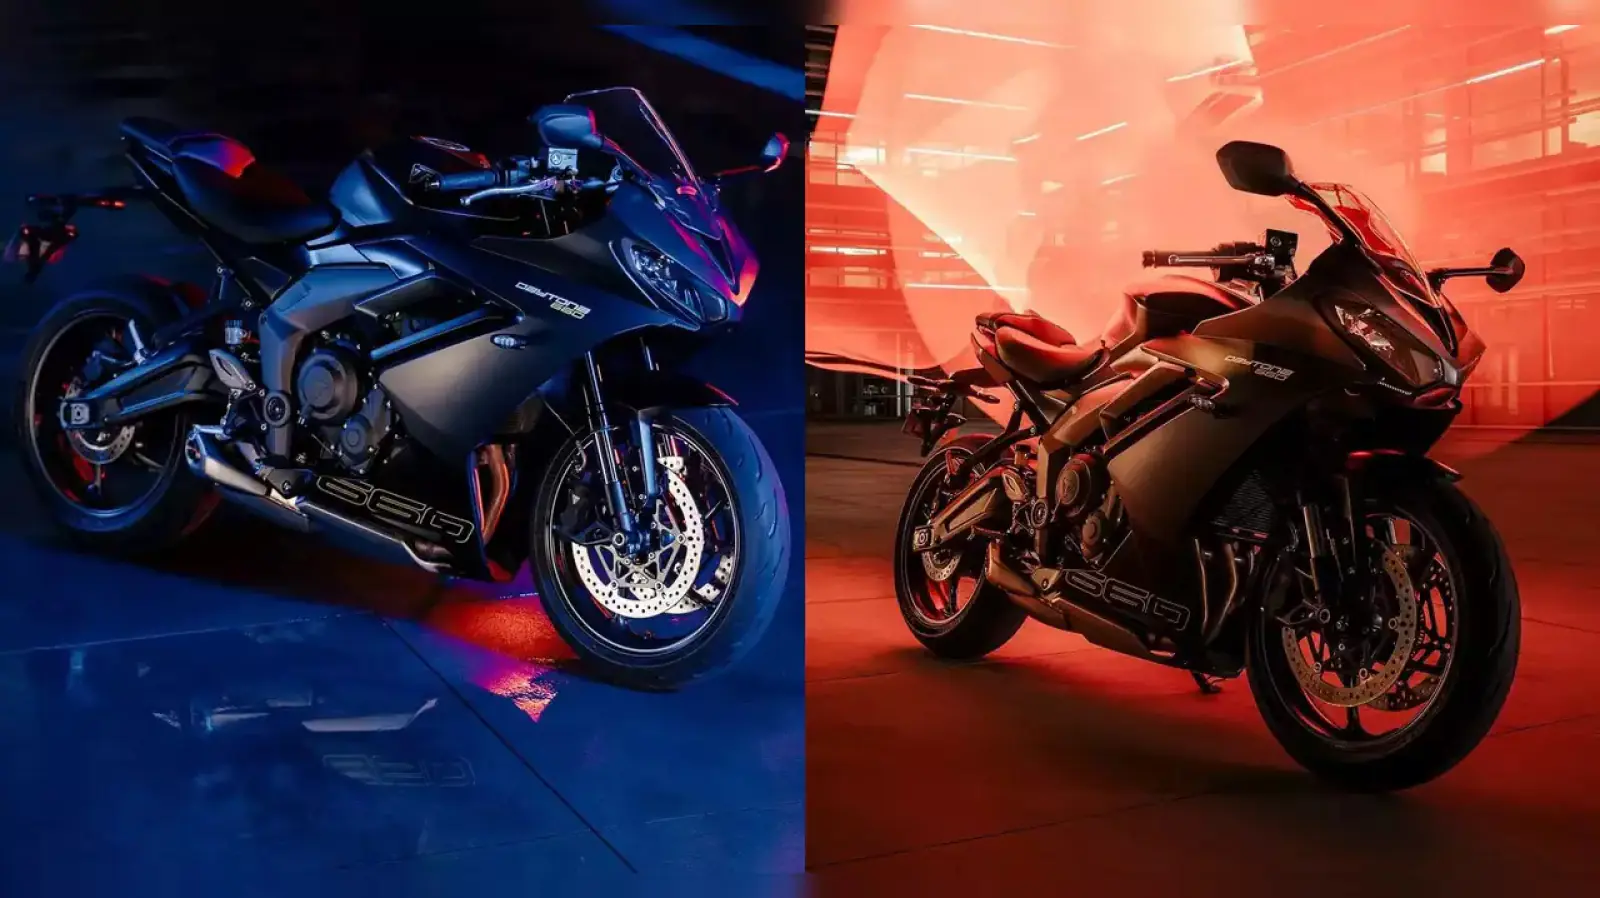 Triumph introduced the new Daytona 660 in the global market, it can be launched in India with these features